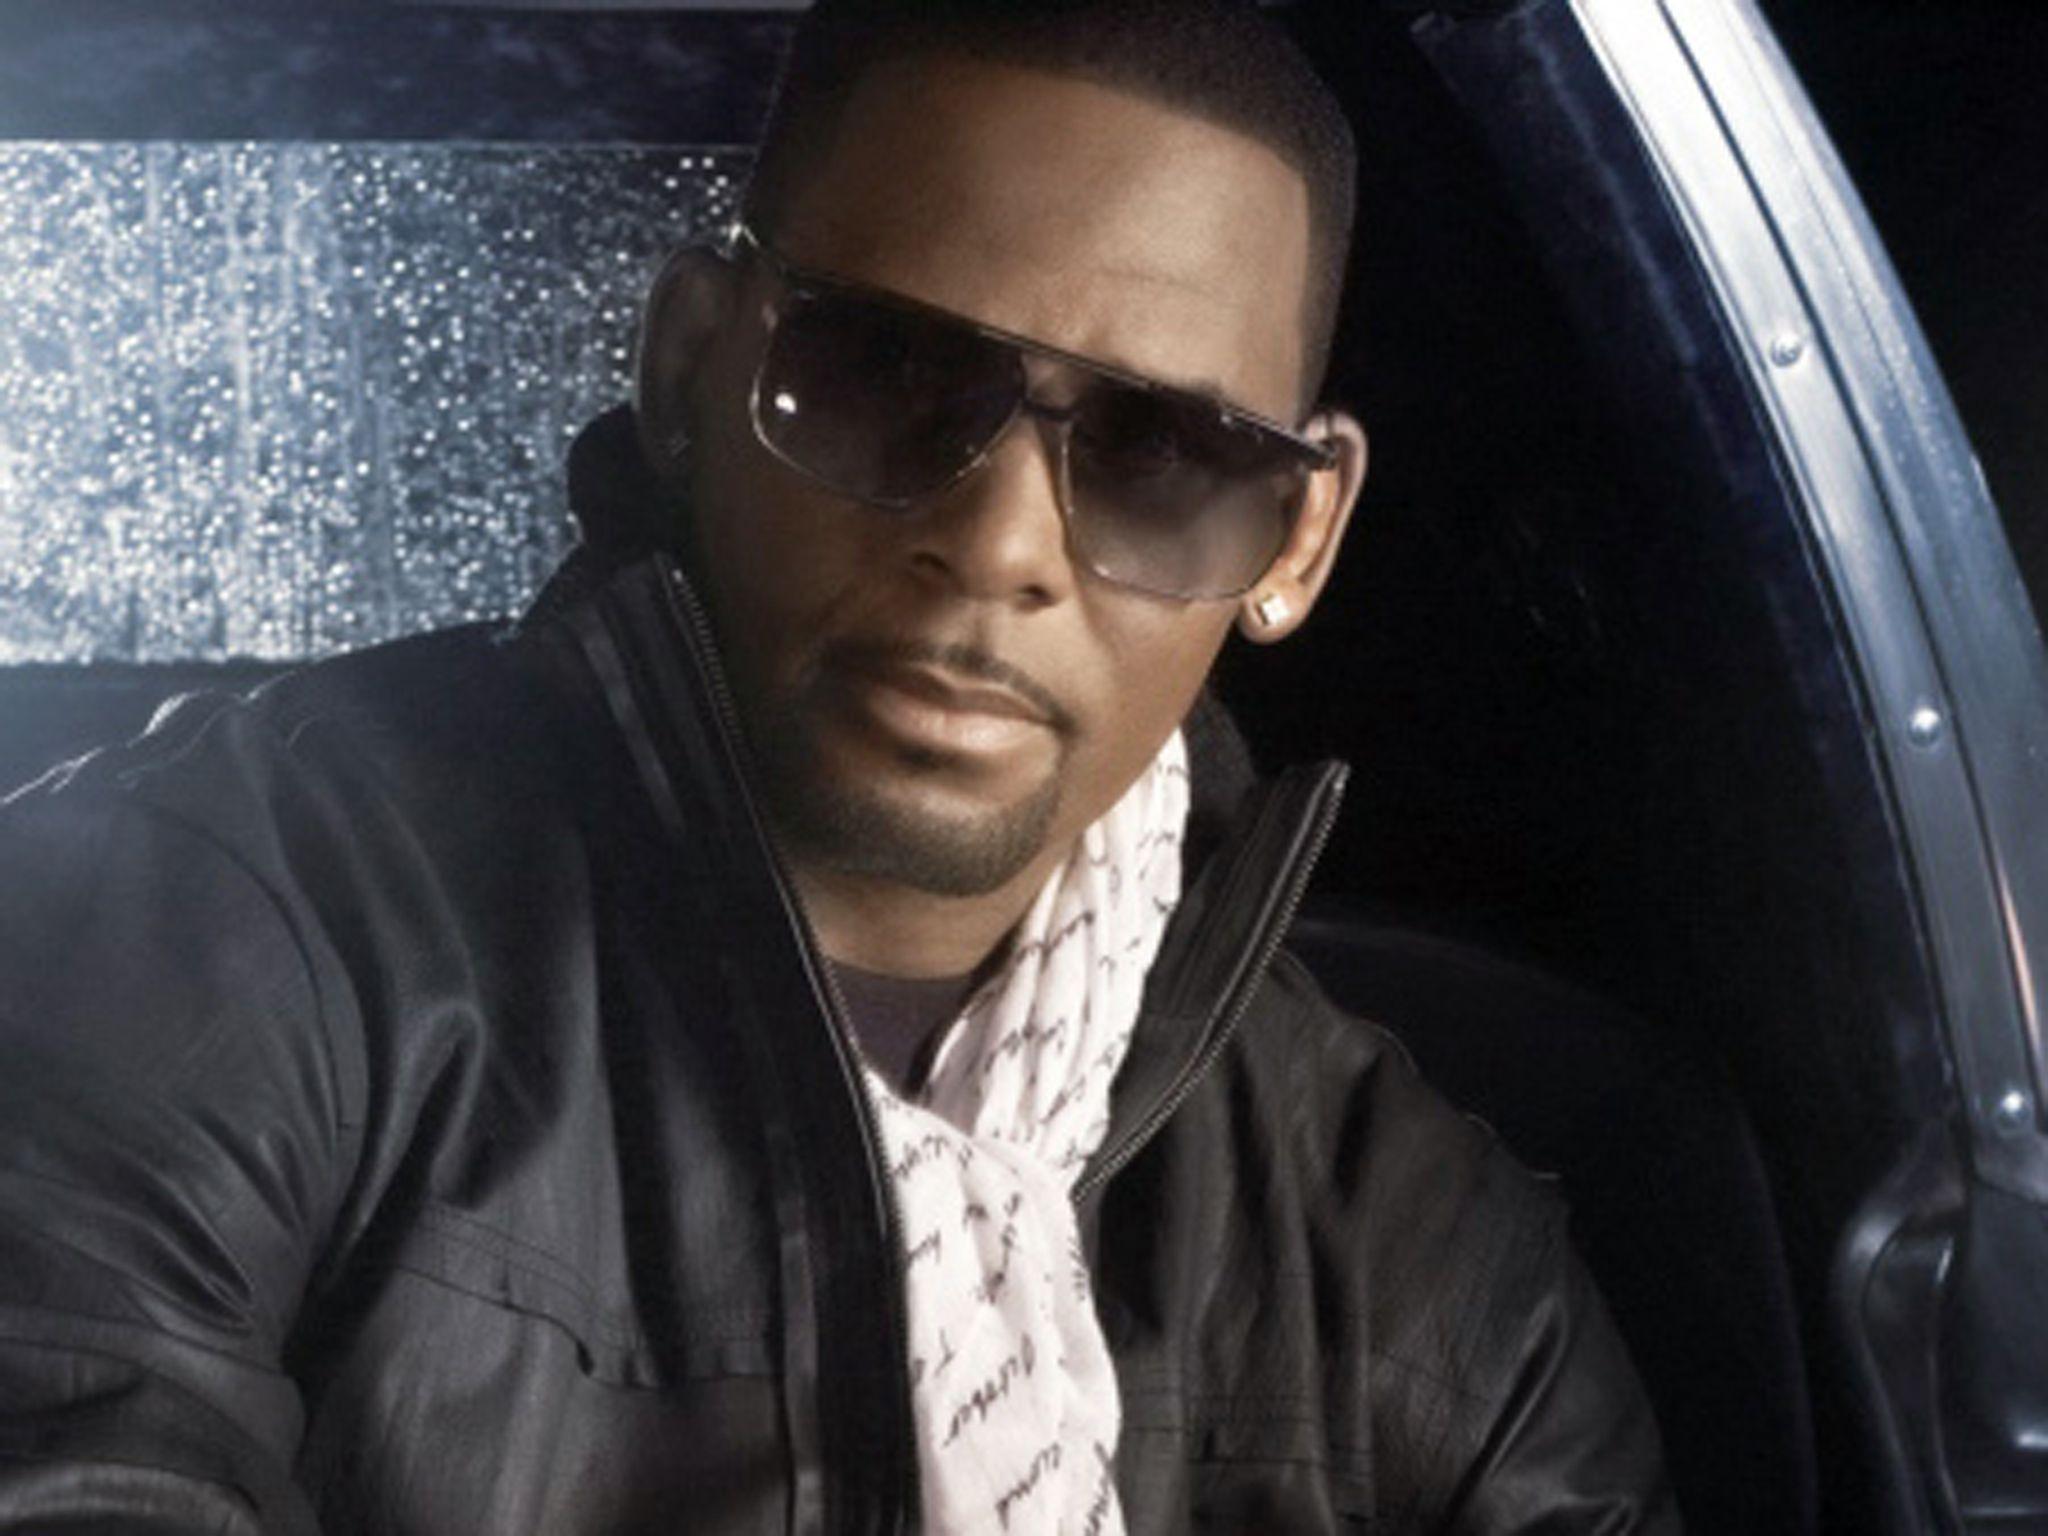 Classic R&B Music image R. Kelly HD wallpaper and background photo